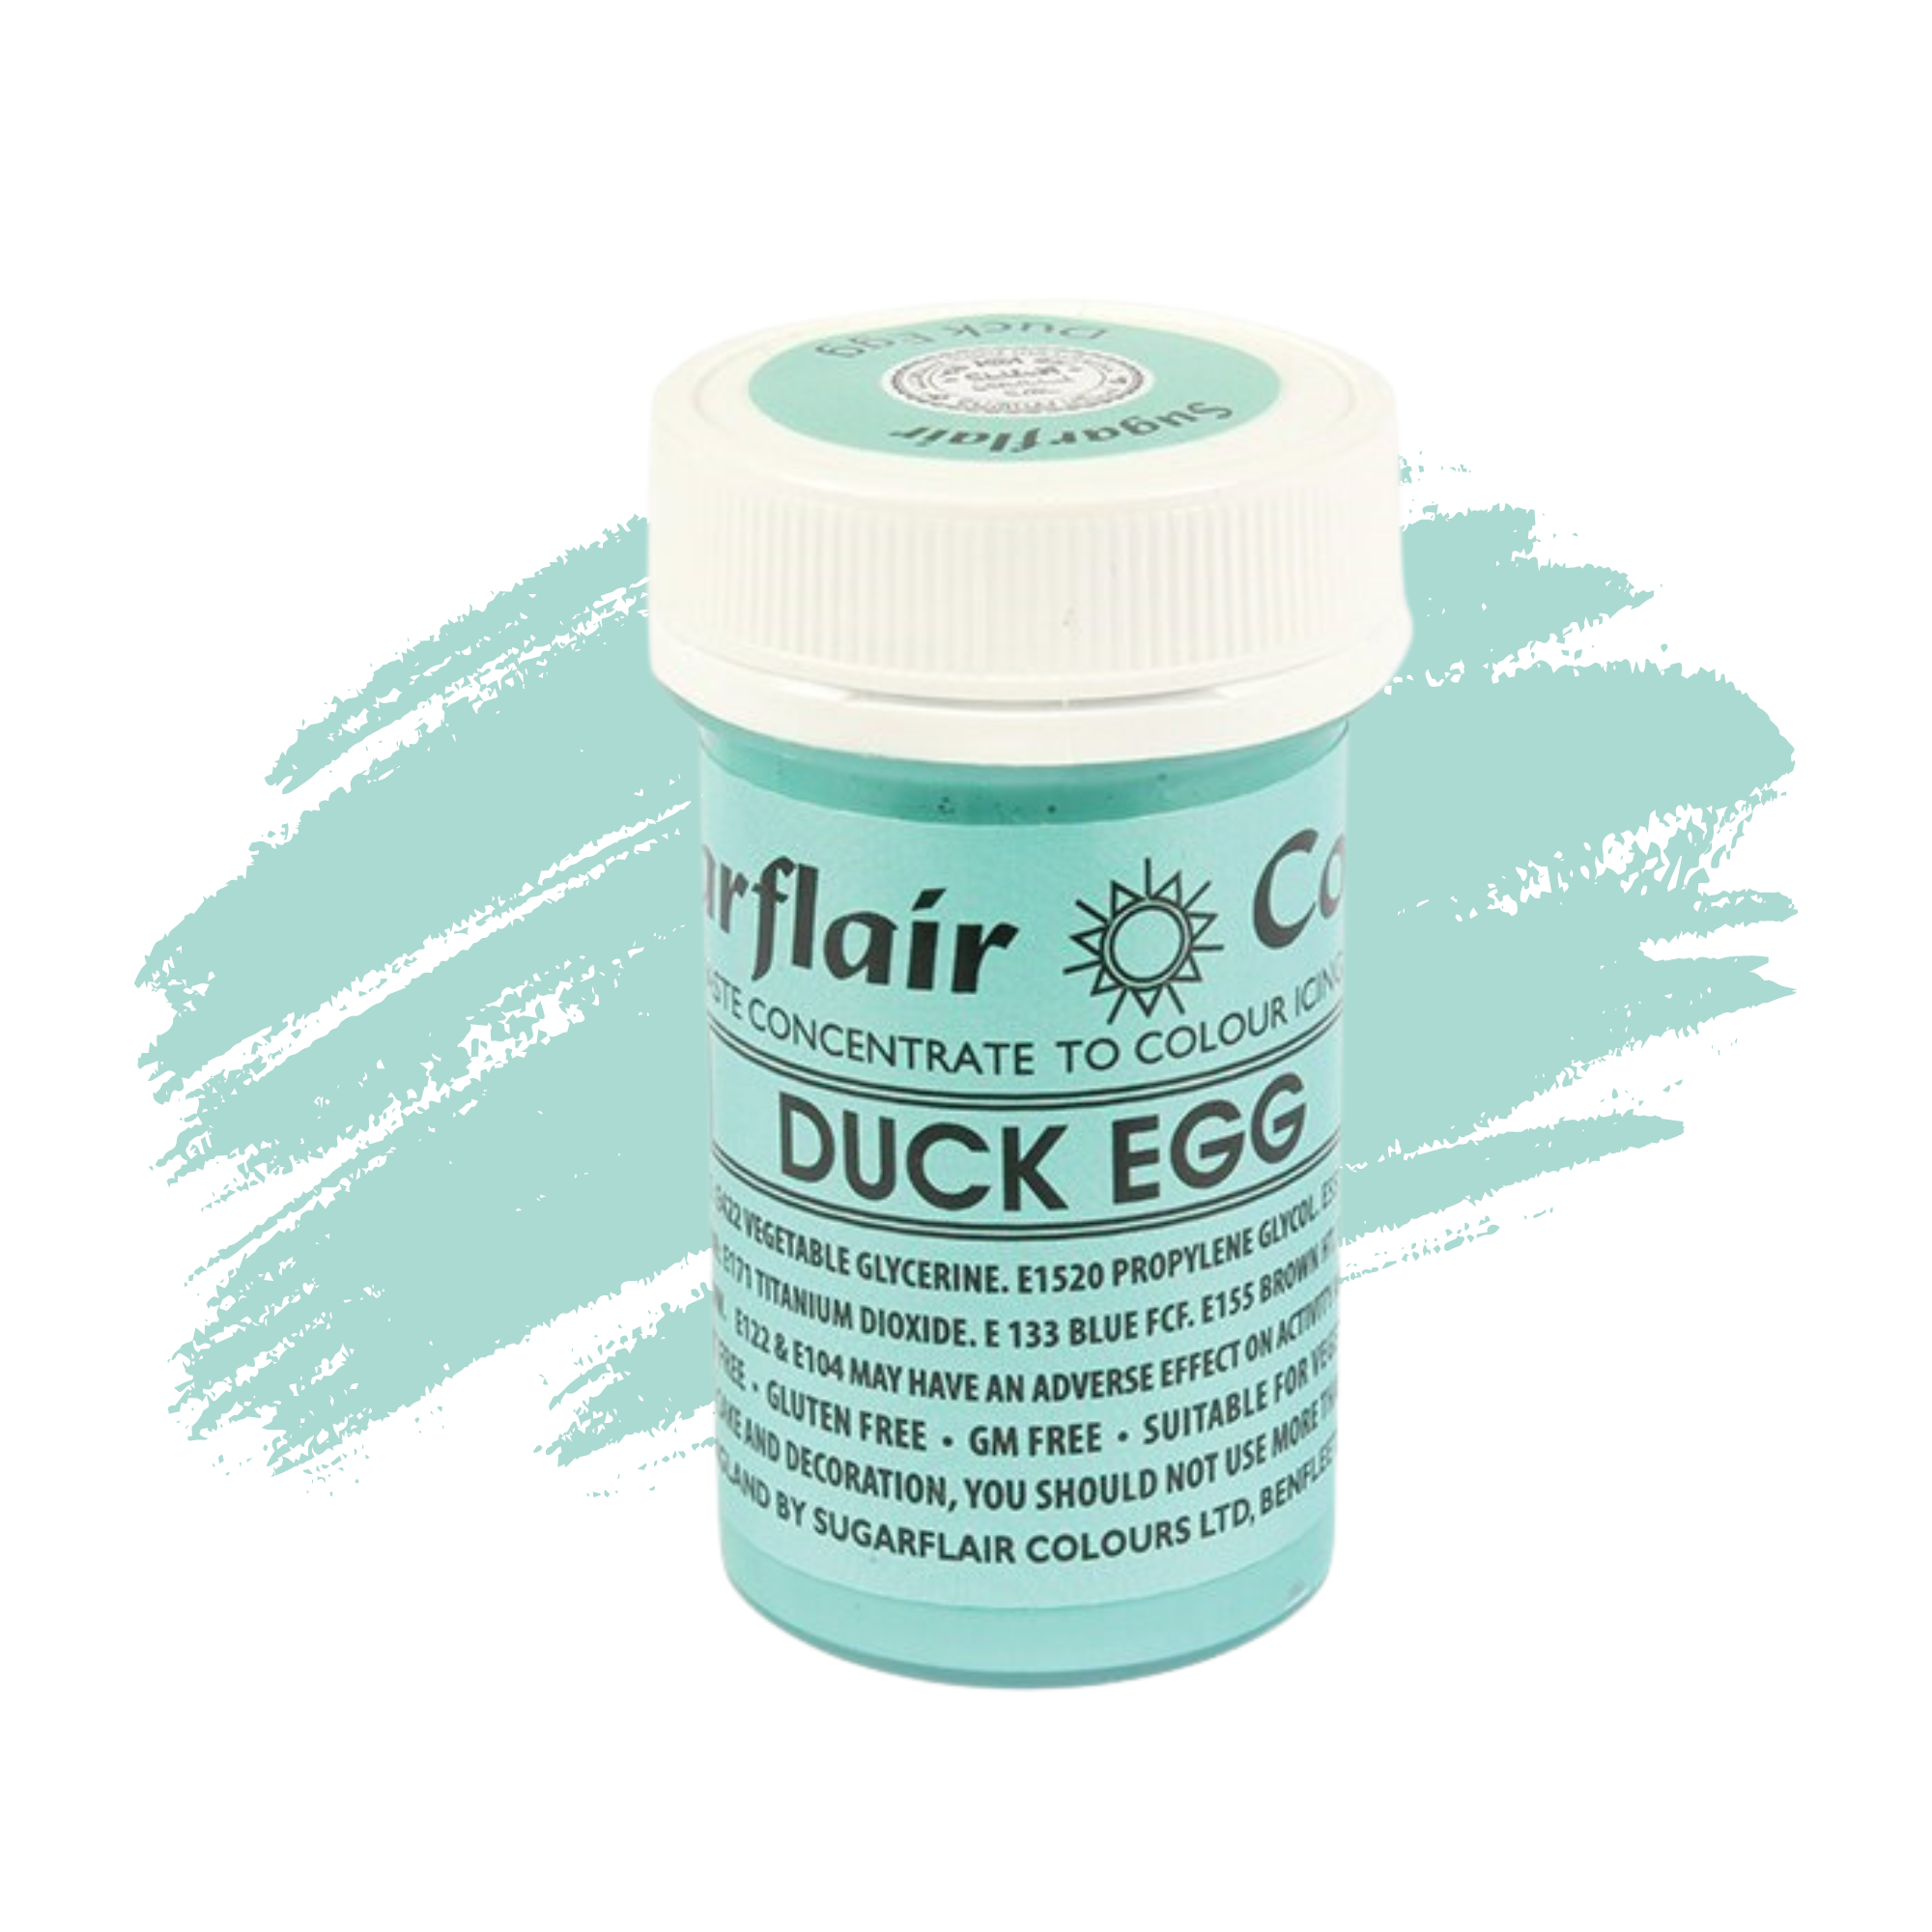 Sugarflair Paste Colours Concentrated Food Colouring - Spectral Duck Egg - 25g